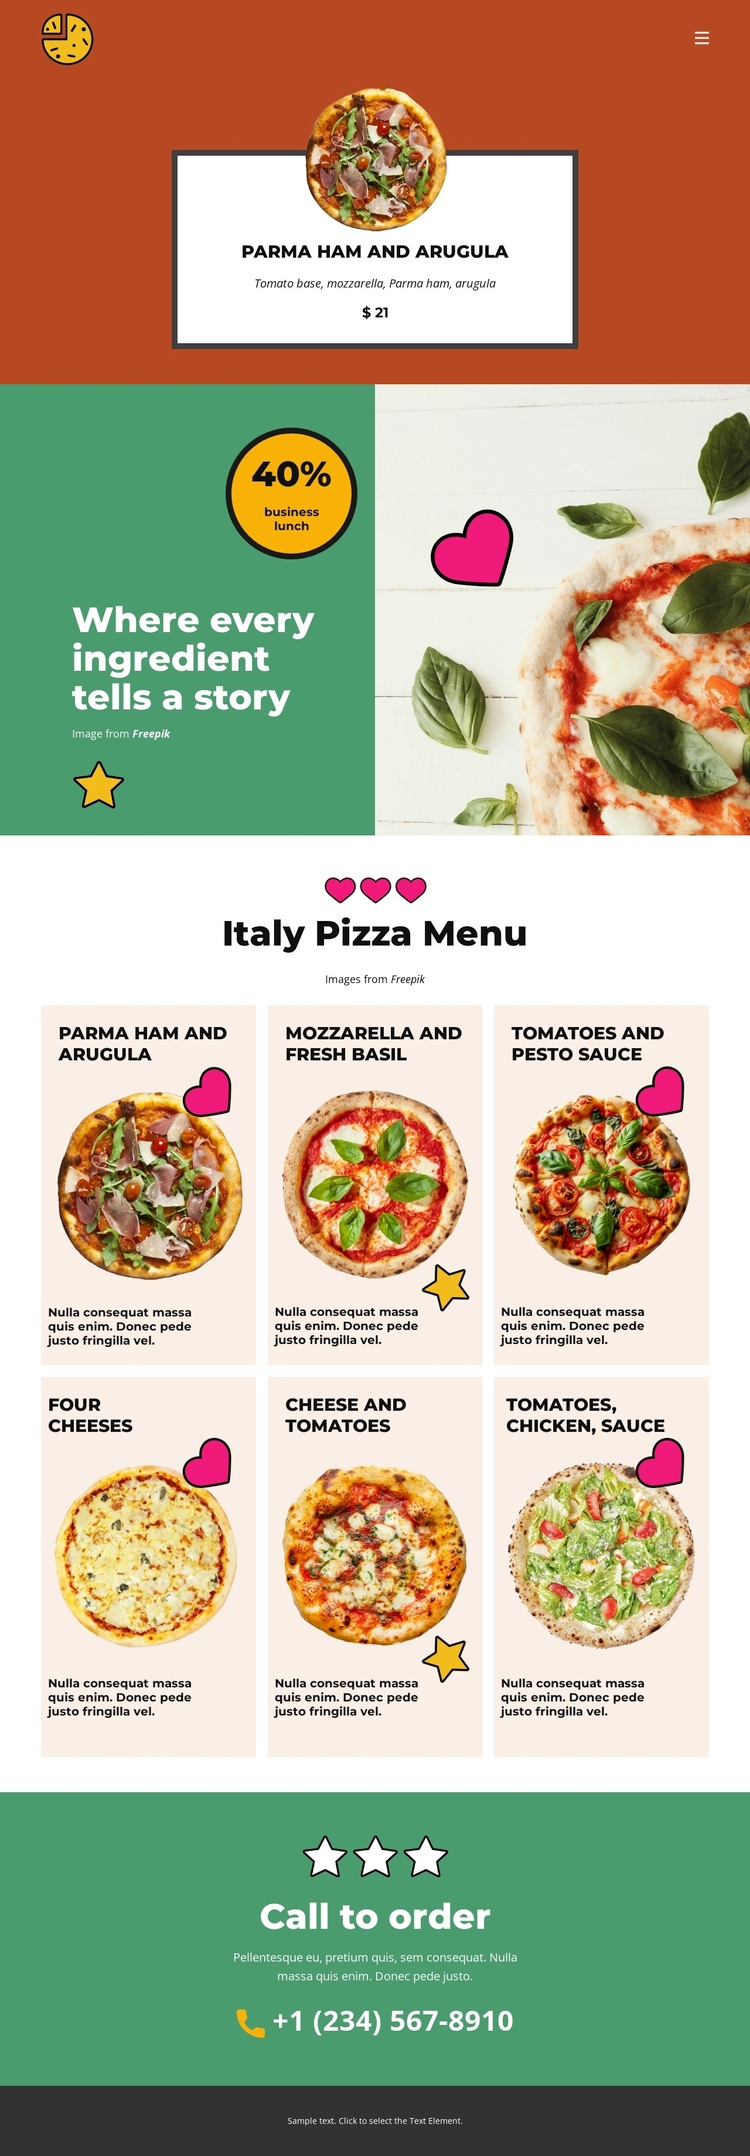 Fun Facts about Pizza Website Builder Software